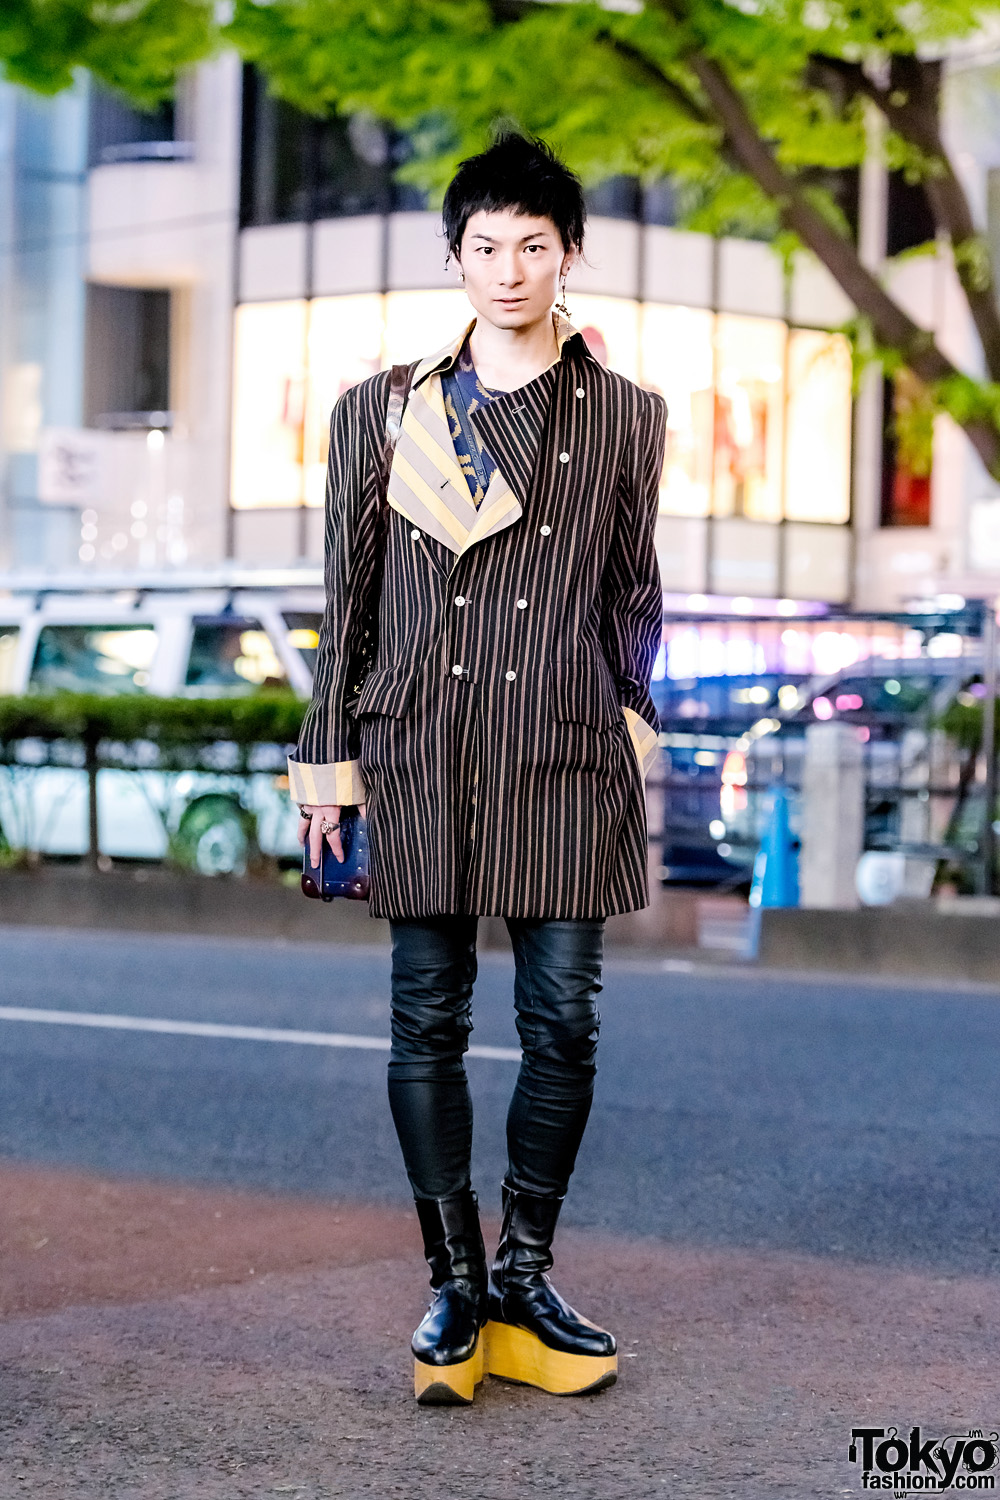 Harajuku Designer Streetwear Style w/ Double-Breasted Coat, Skinny Leather Pants, Leather Box Bag & Cutout Platforms